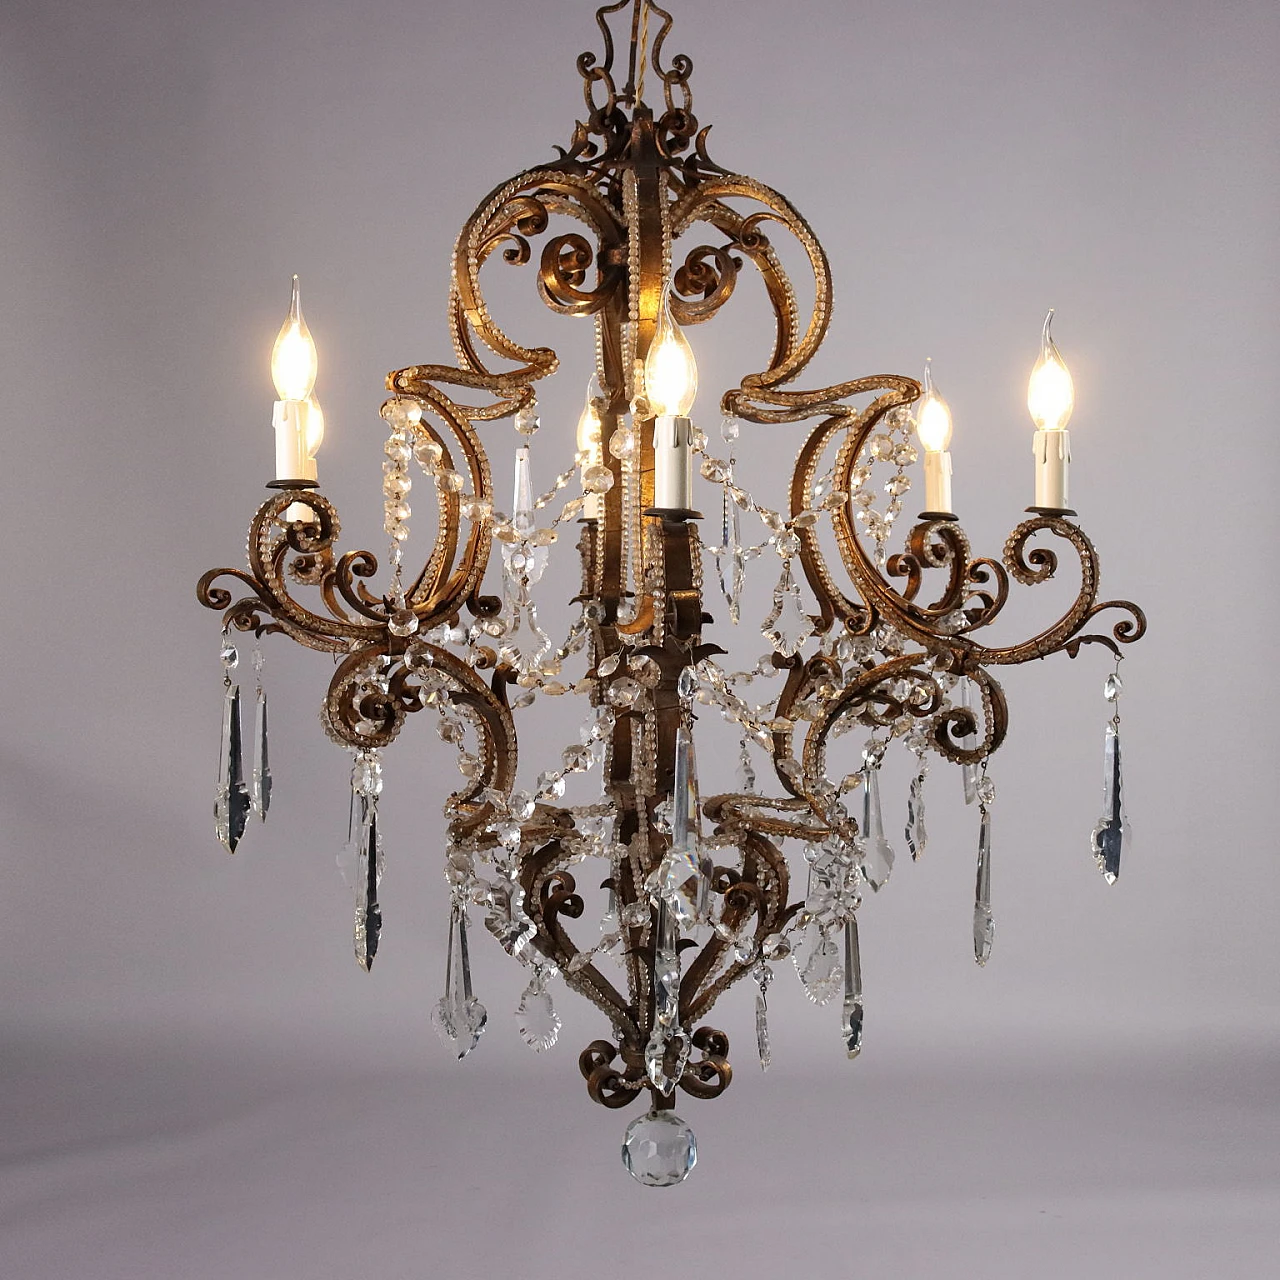 Six-light gilded wrought iron & glass chandelier, 19th century 3